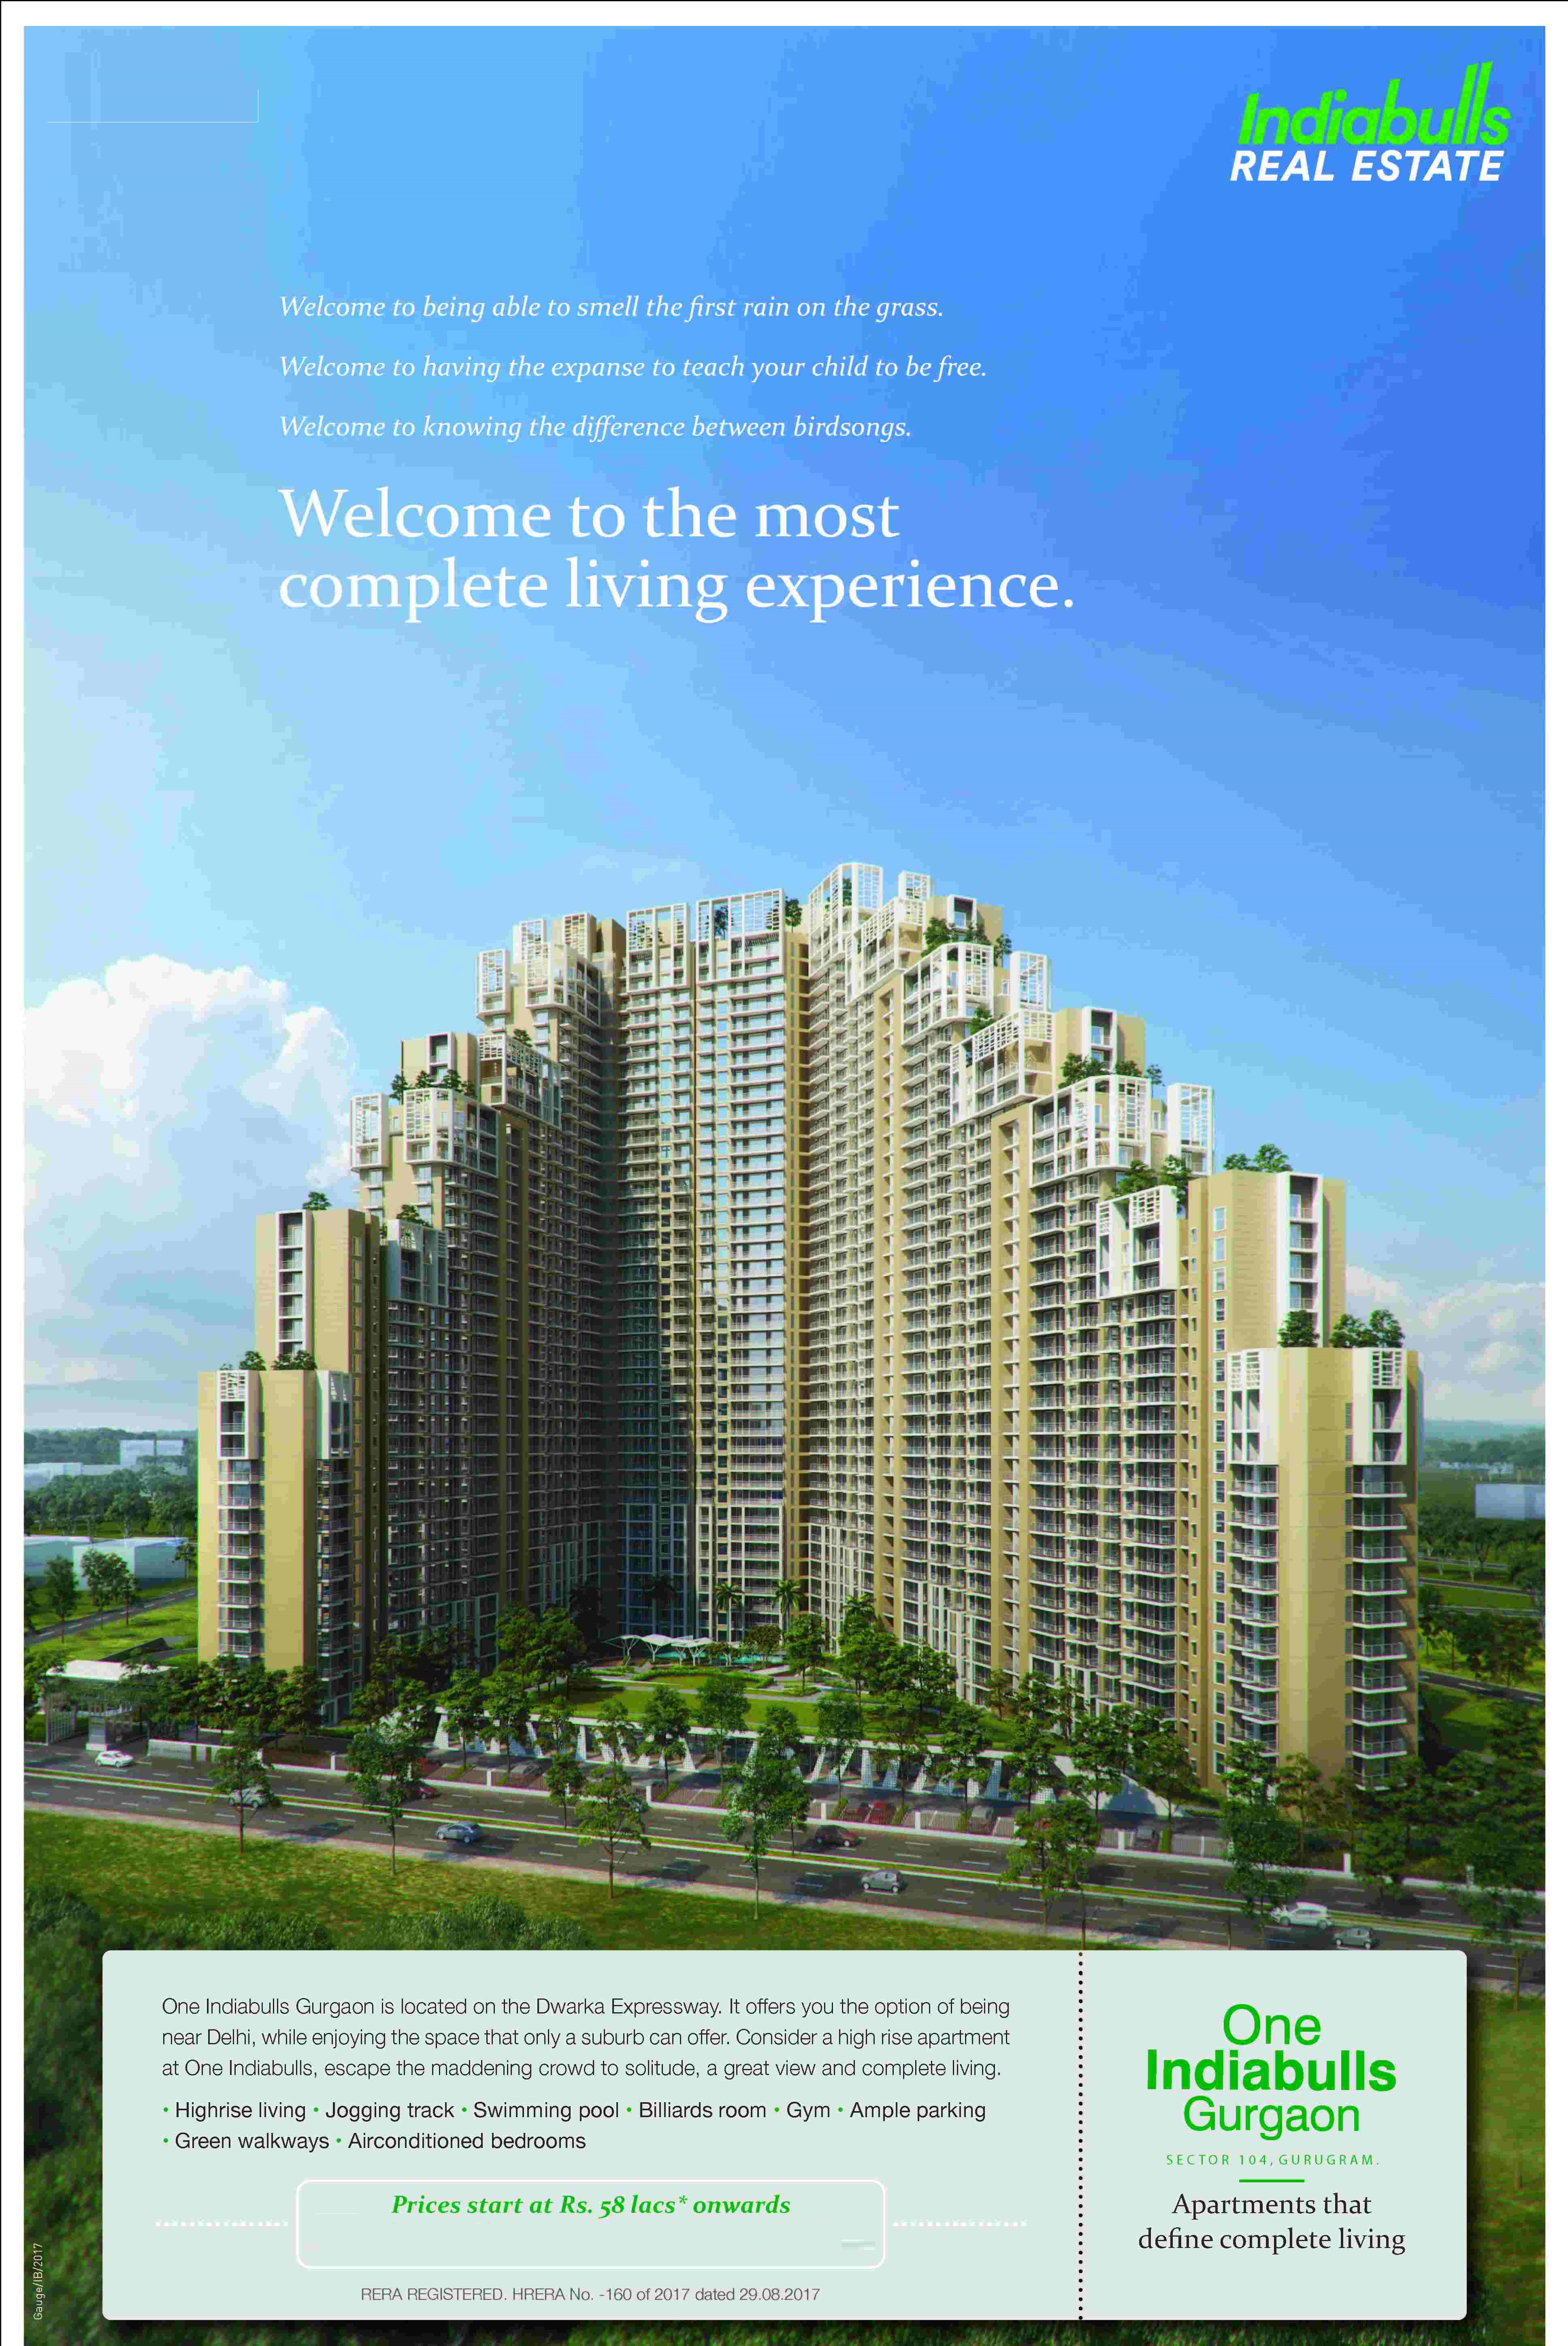 Welcome to the most complete living experience at One Indiabulls in Gurgaon Update